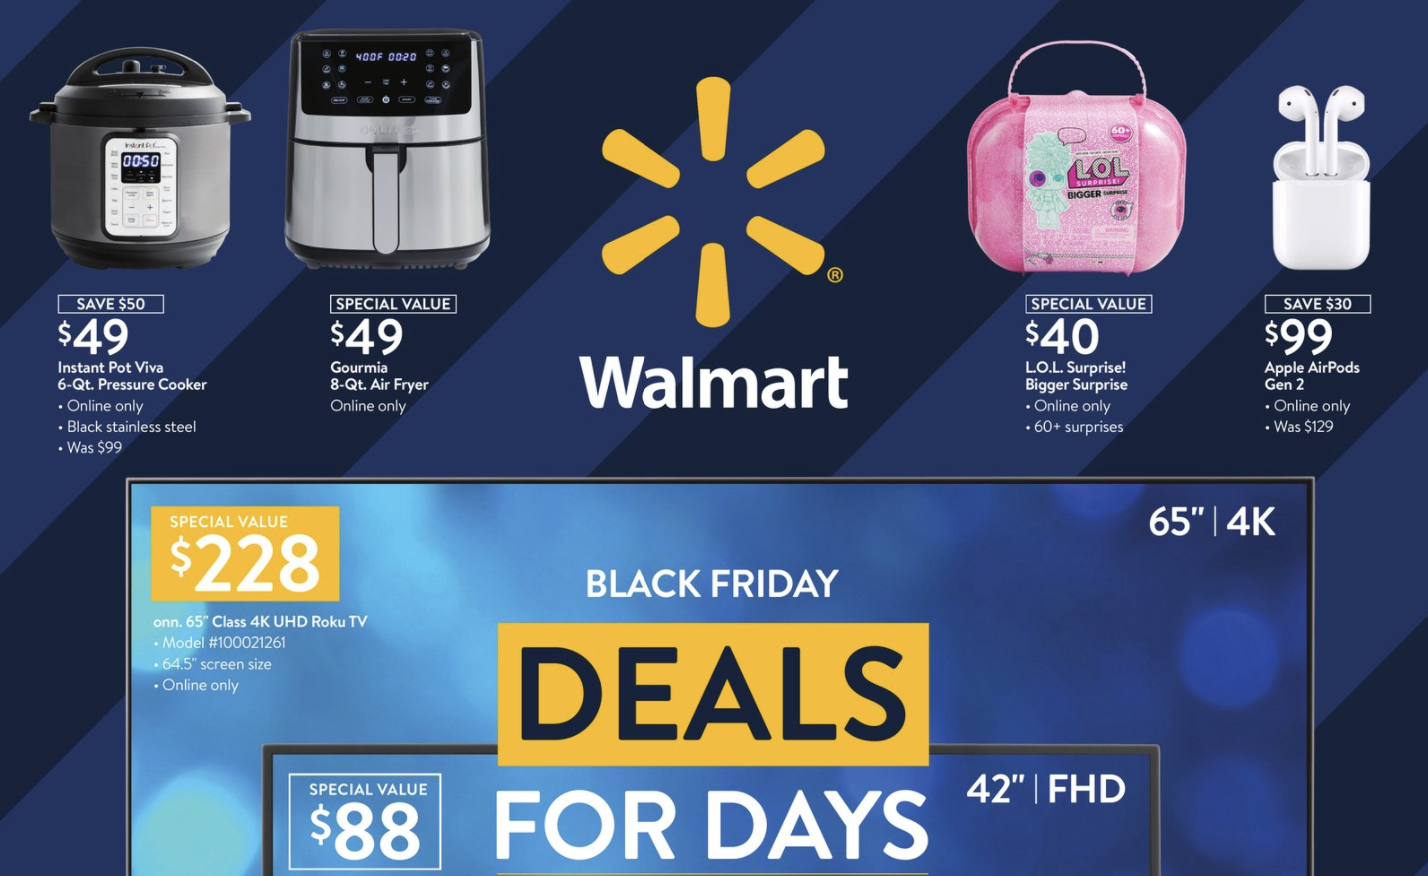 Walmart Cash Back Offers, Coupons & Black Friday Discounts